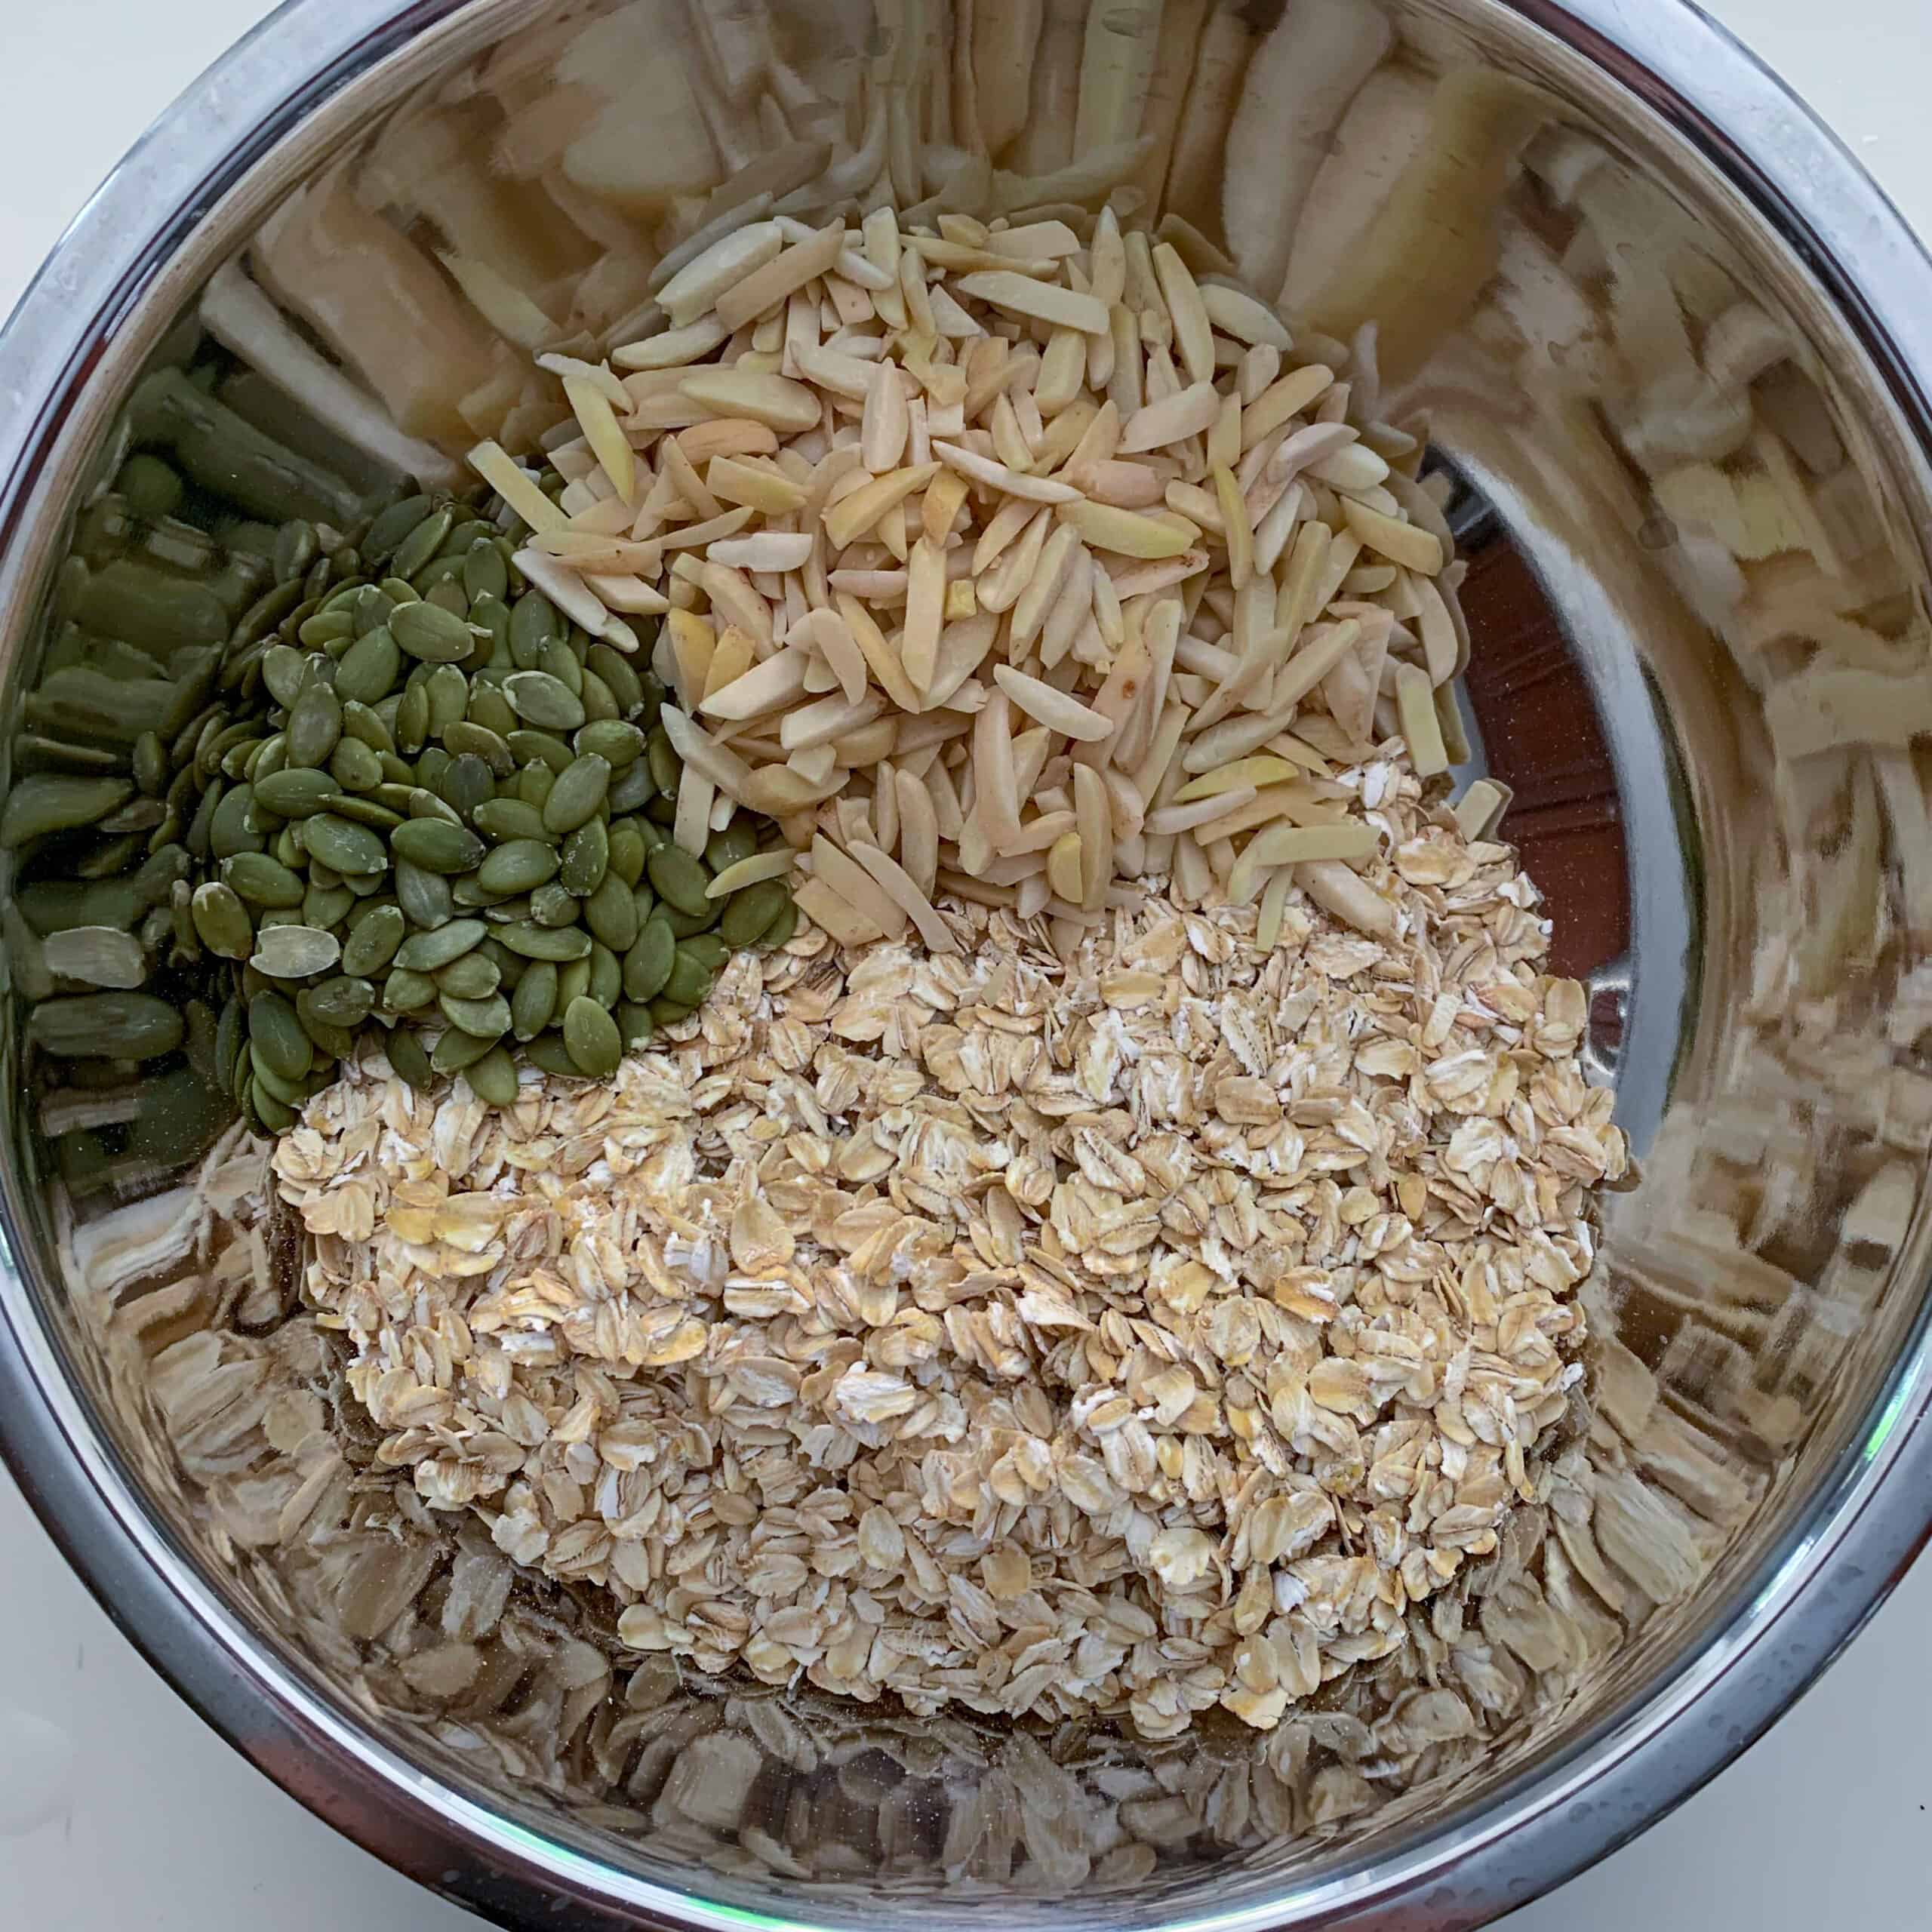 dry ingredients for granola in silver bowl (oats, slivered almonds and pumpkin seeds)